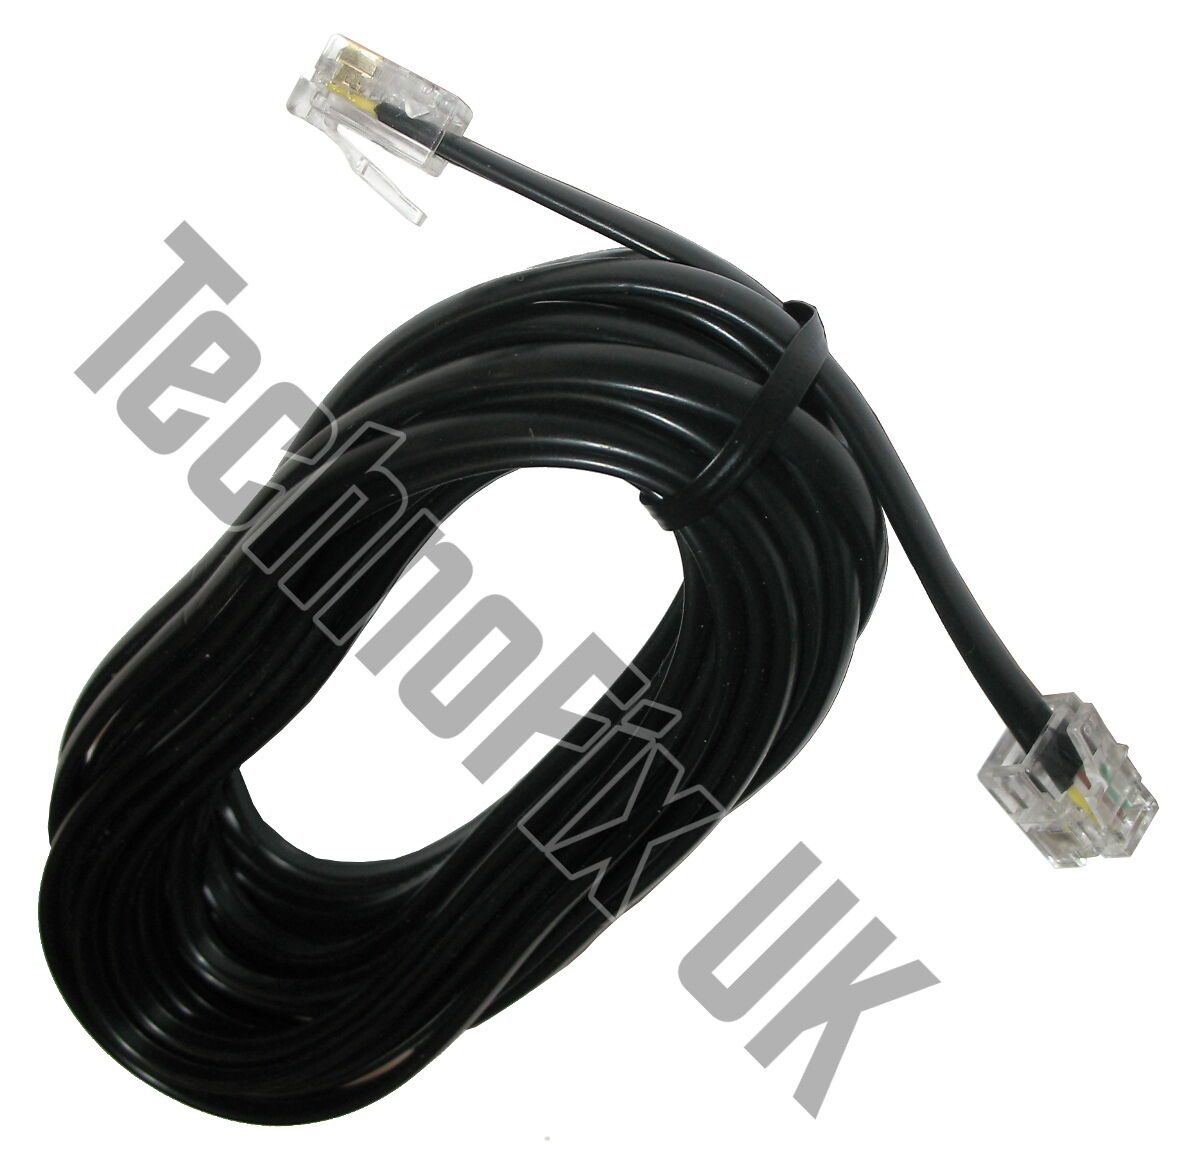 Separation cable (5m) for Icom IC-2820H IC-E2820 remote head OPC-1663 equivalent